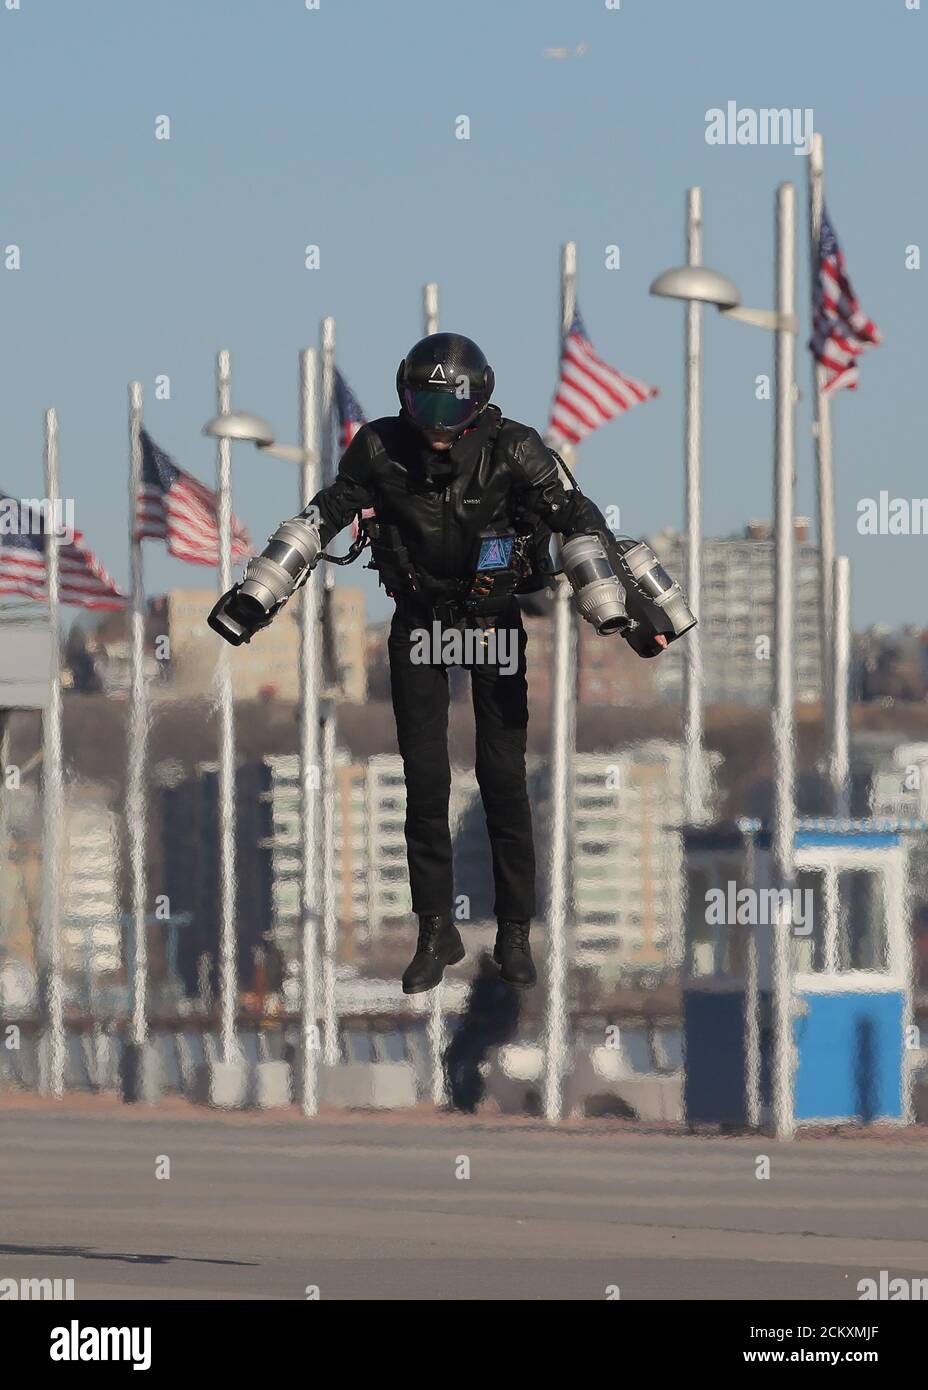 Sam Rogers, flight suit design engineer at Gravity Industries, demonstrates a Jet Suit at the Intrepid Sea, Air & Space Museum in New York, U.S., April 3, 2019. REUTERS/Brendan McDermid Stock Photo